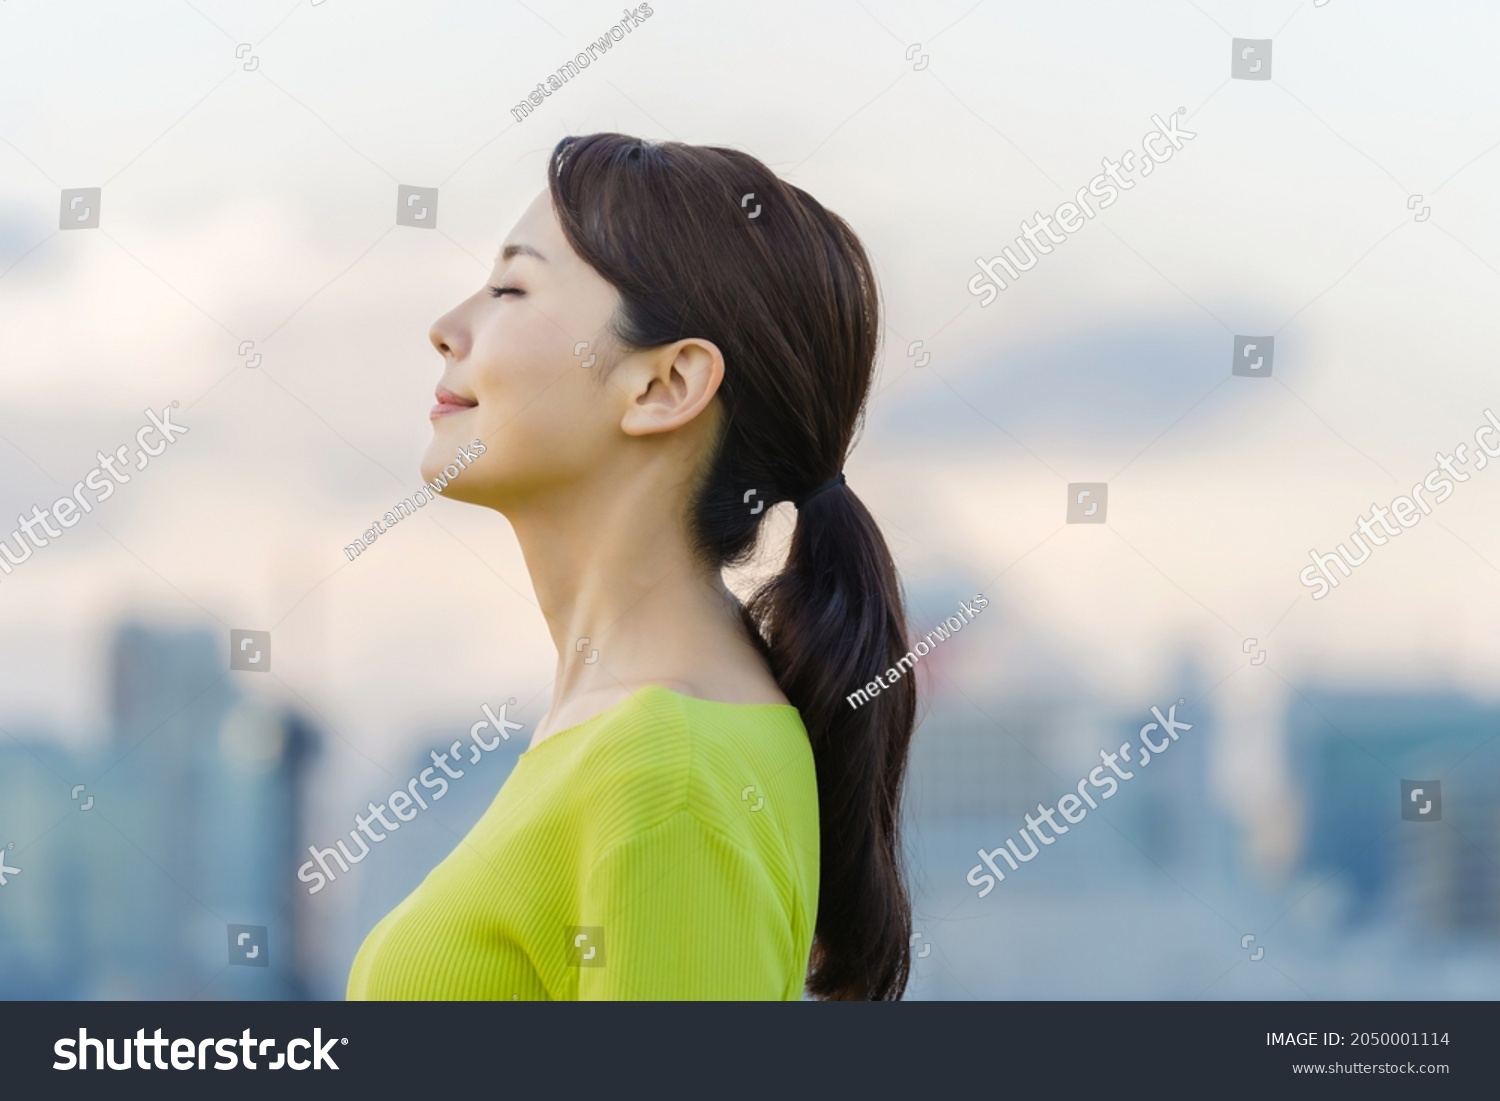 Young asian woman closing eyes in front of the city. #2050001114